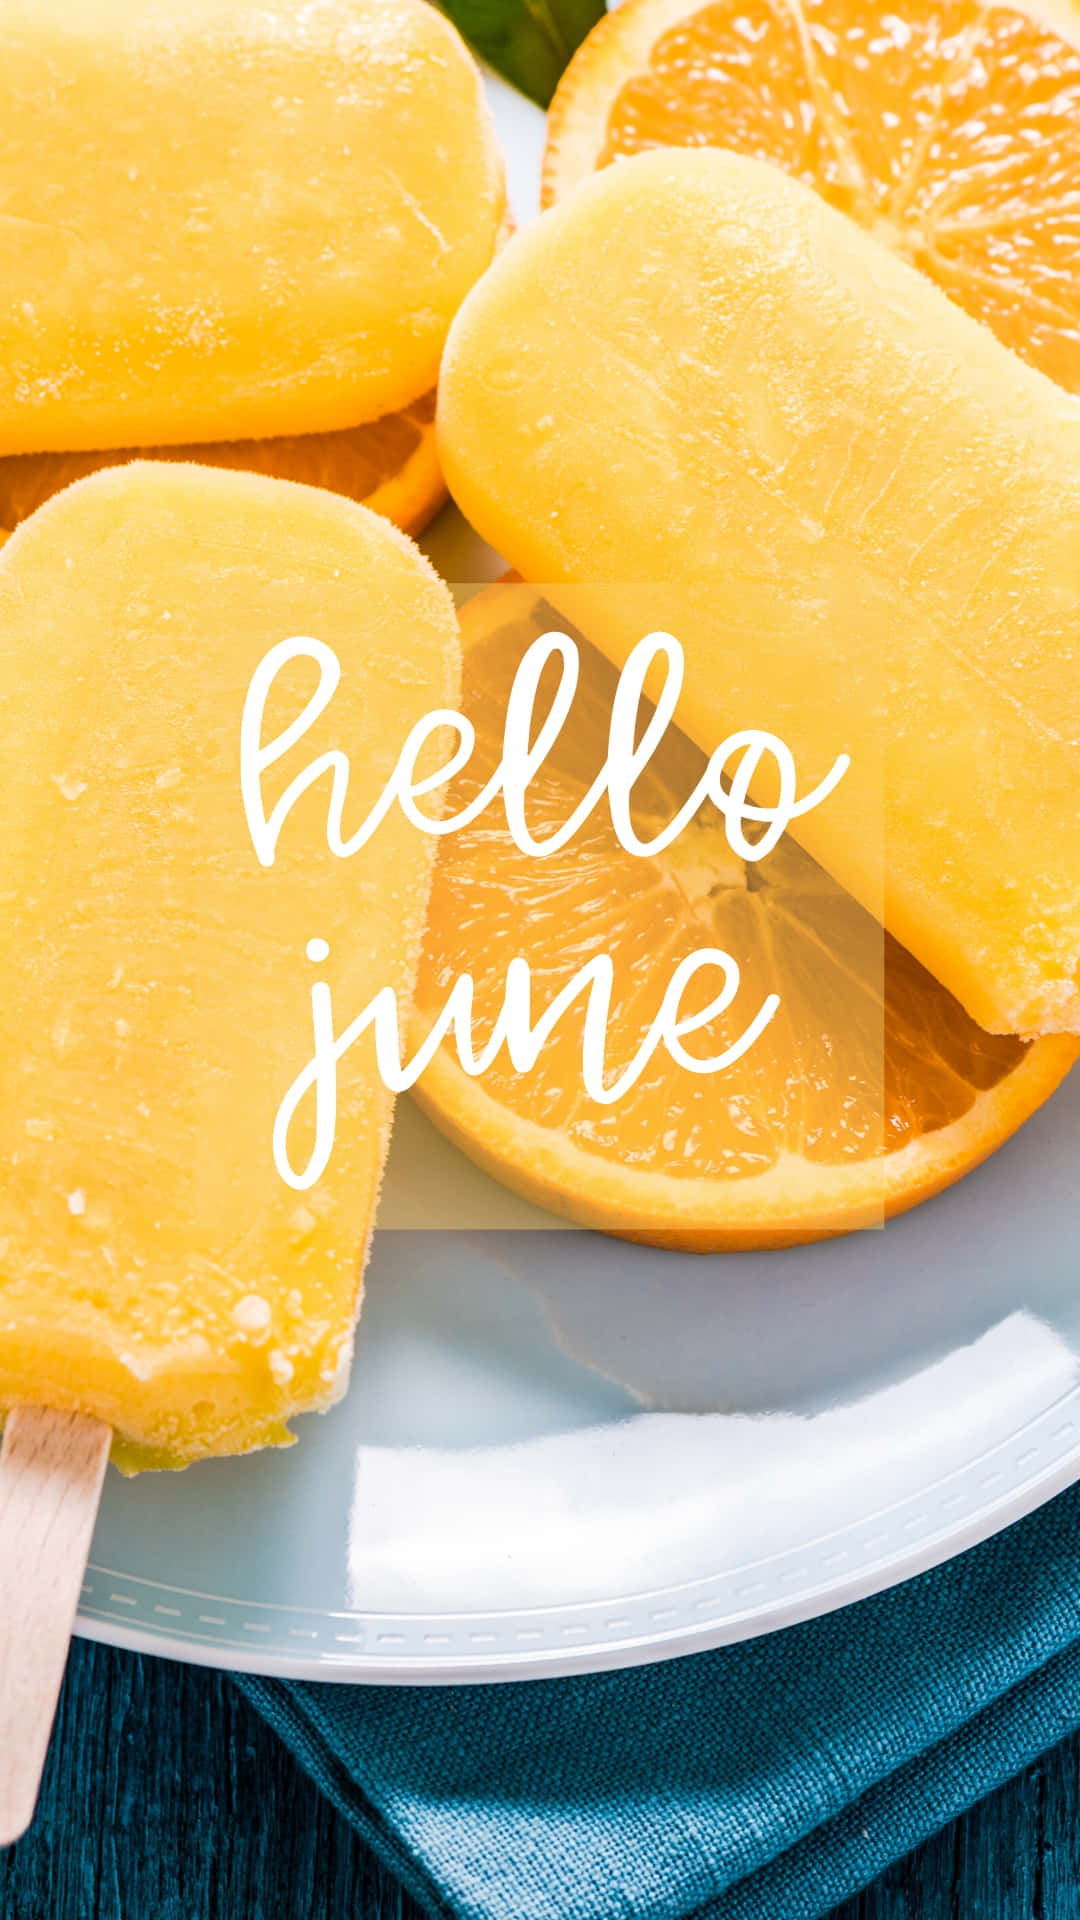 hello june popsicles on a plate Wallpaper